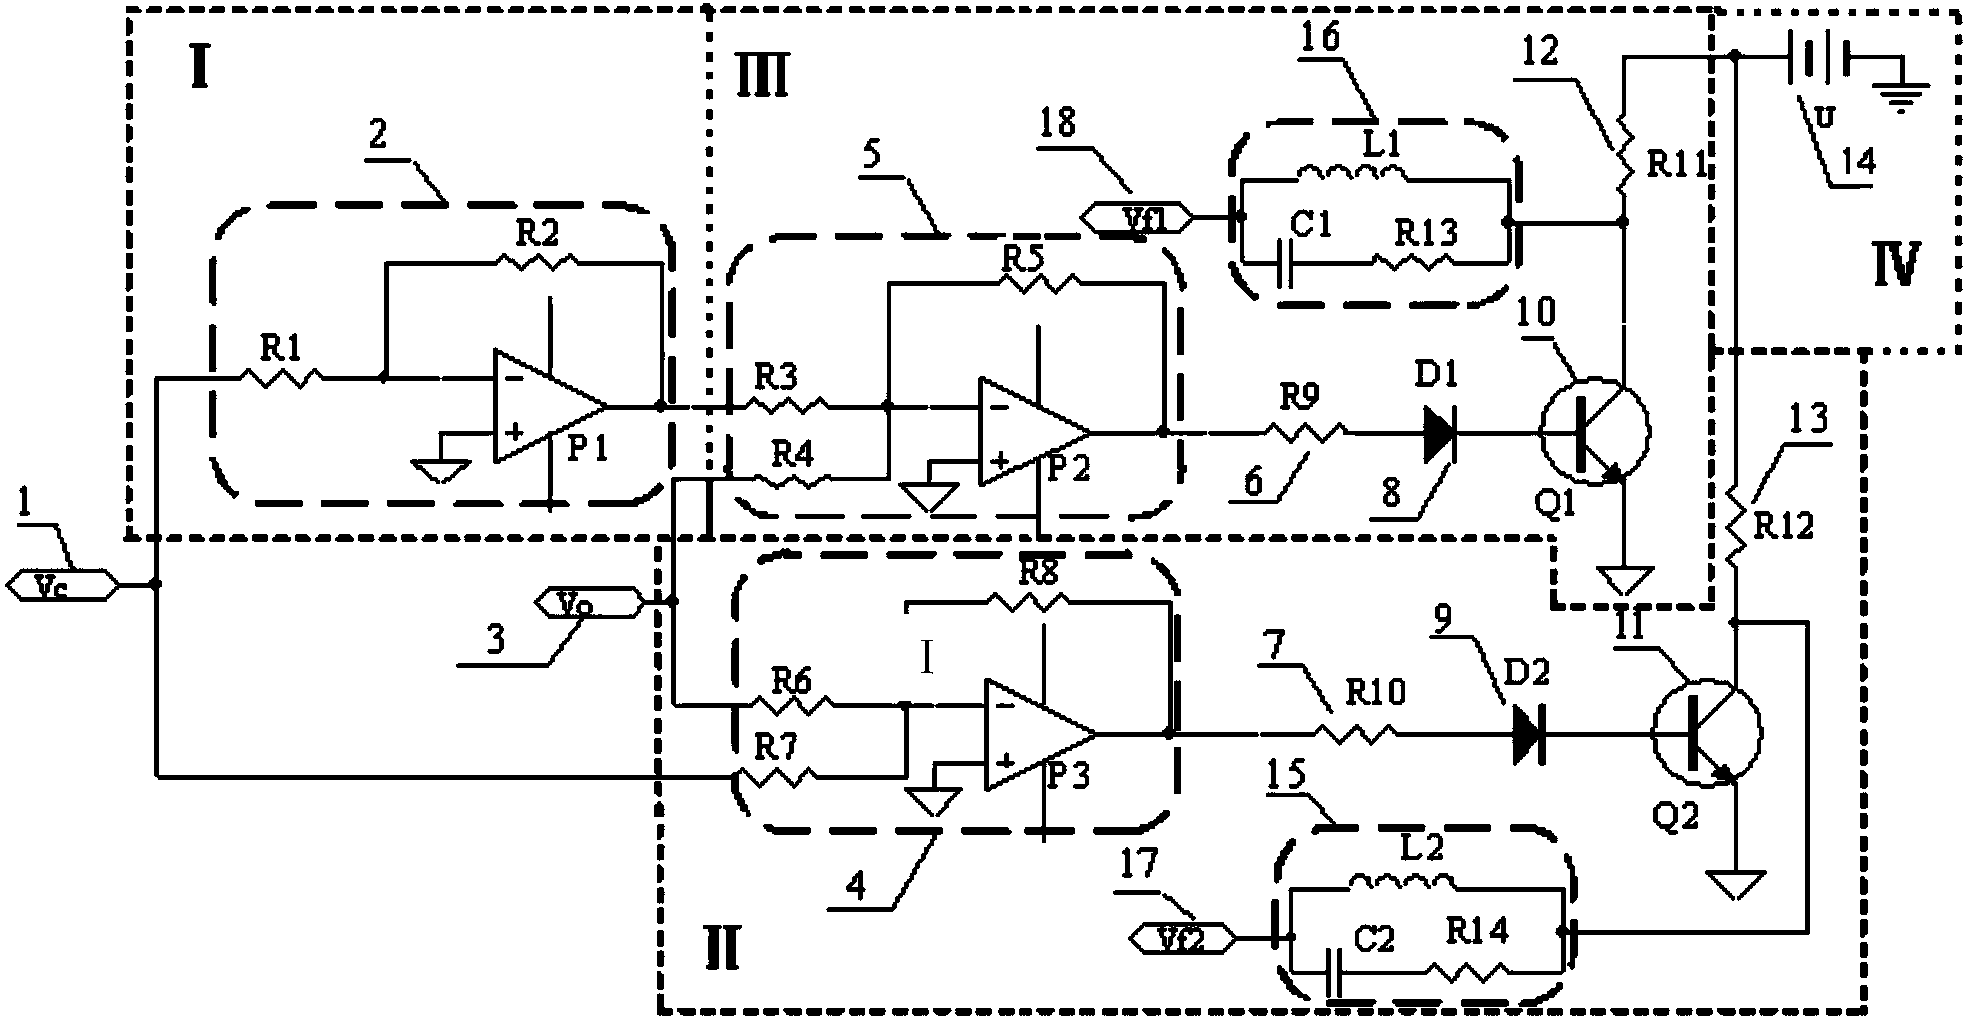 High-voltage static suspension circuit suitable for ground testing of static suspension acceleration meter